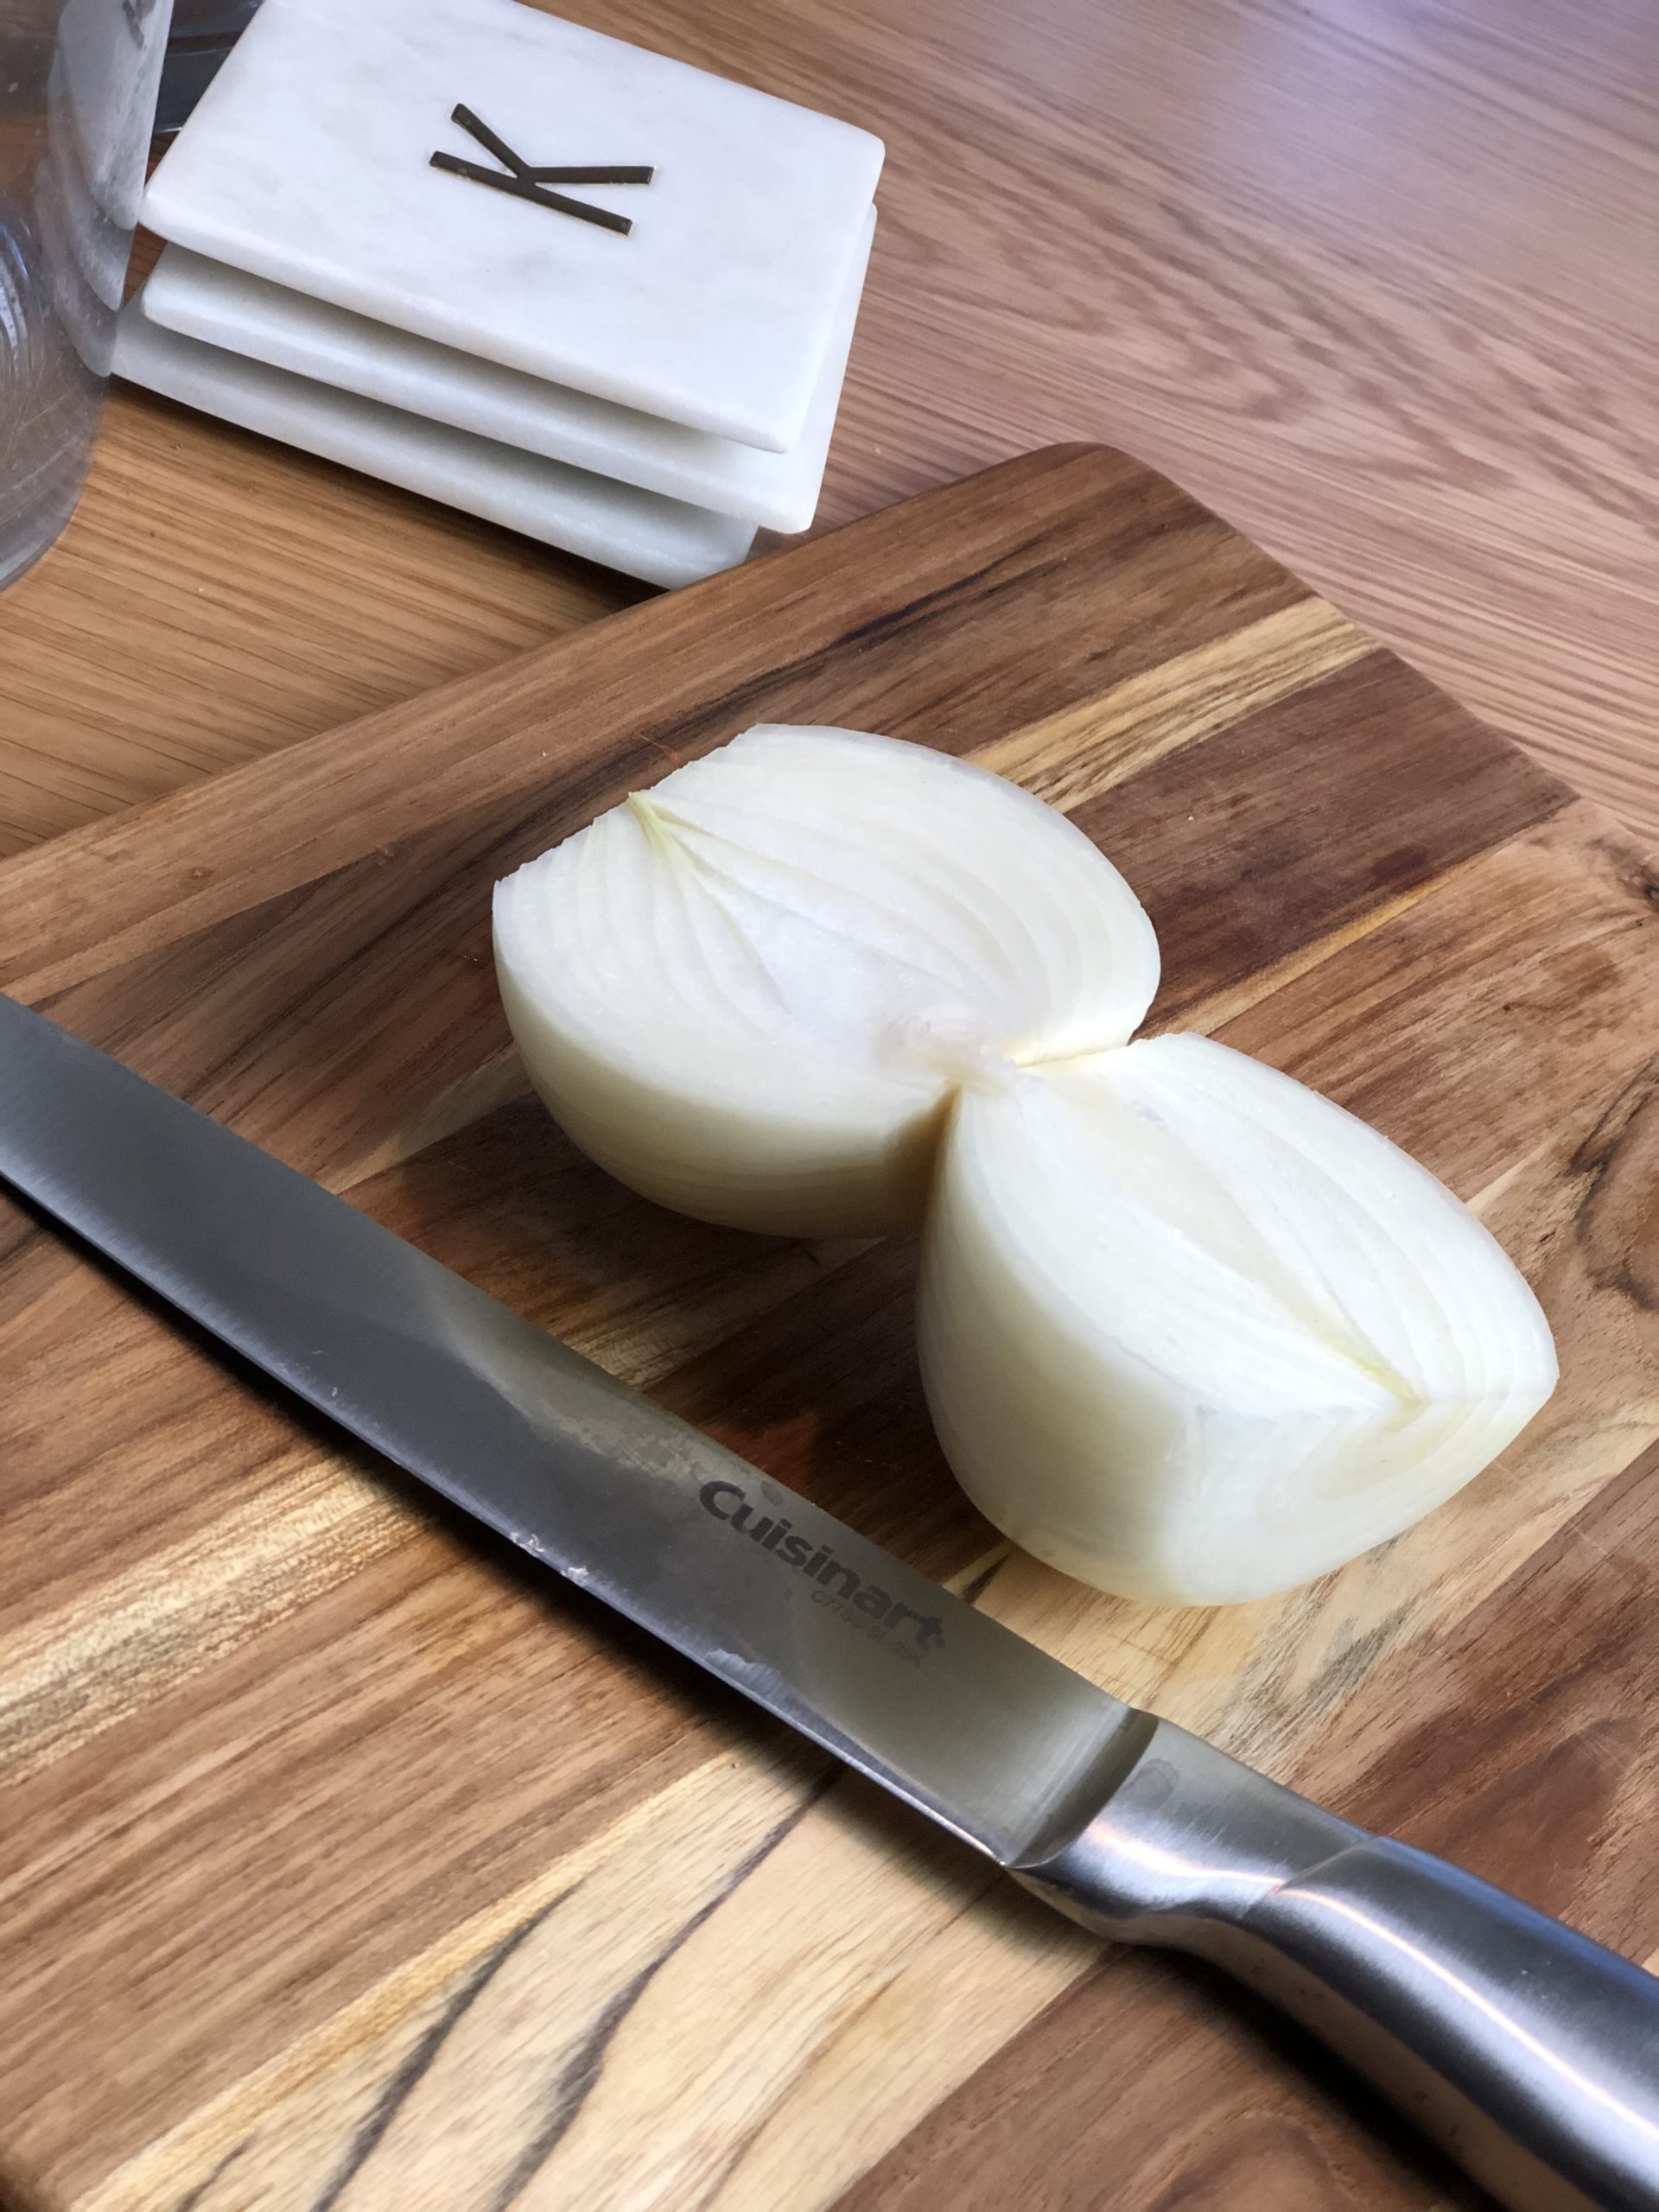 How To Properly Cut An Onion – Three Ways To Cut An Onion